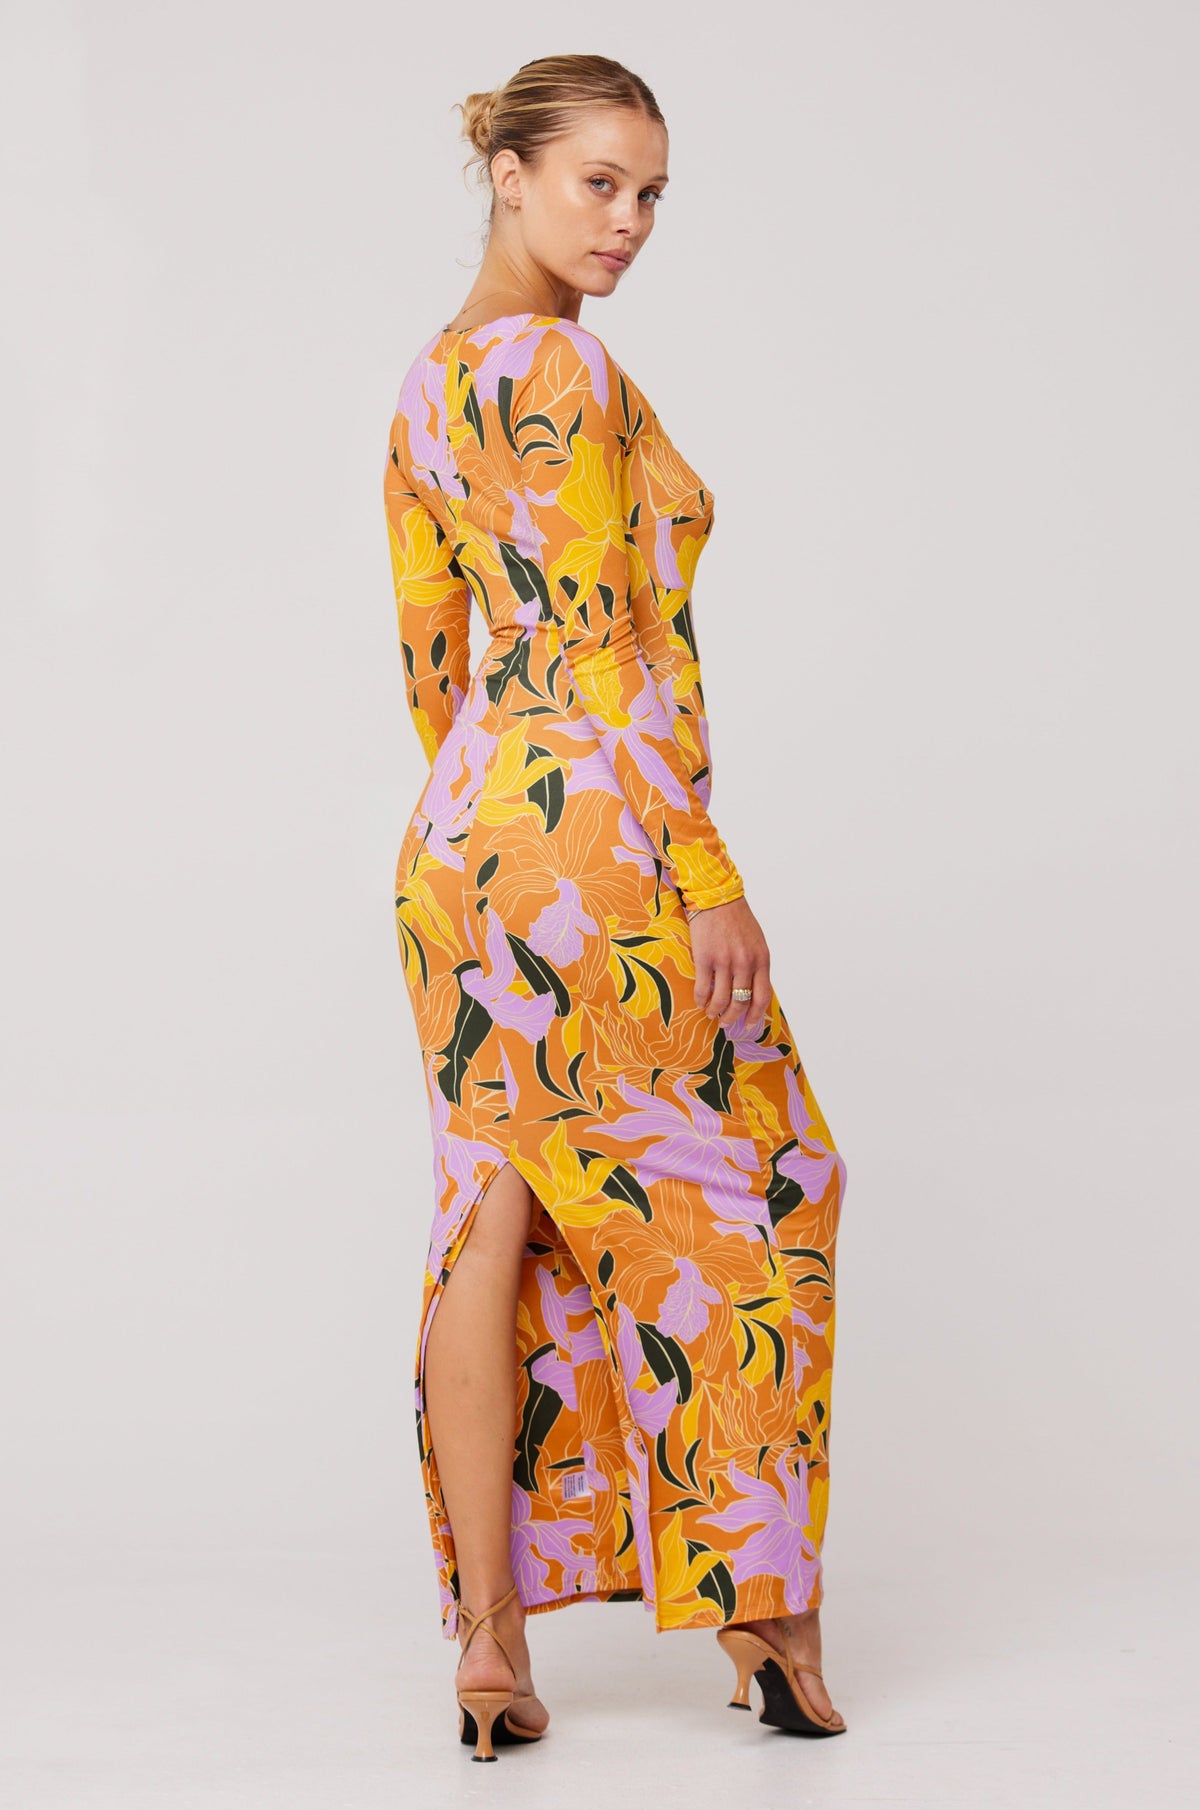 This is an image of Simone Dress in Doheny - RESA featuring a model wearing the dress